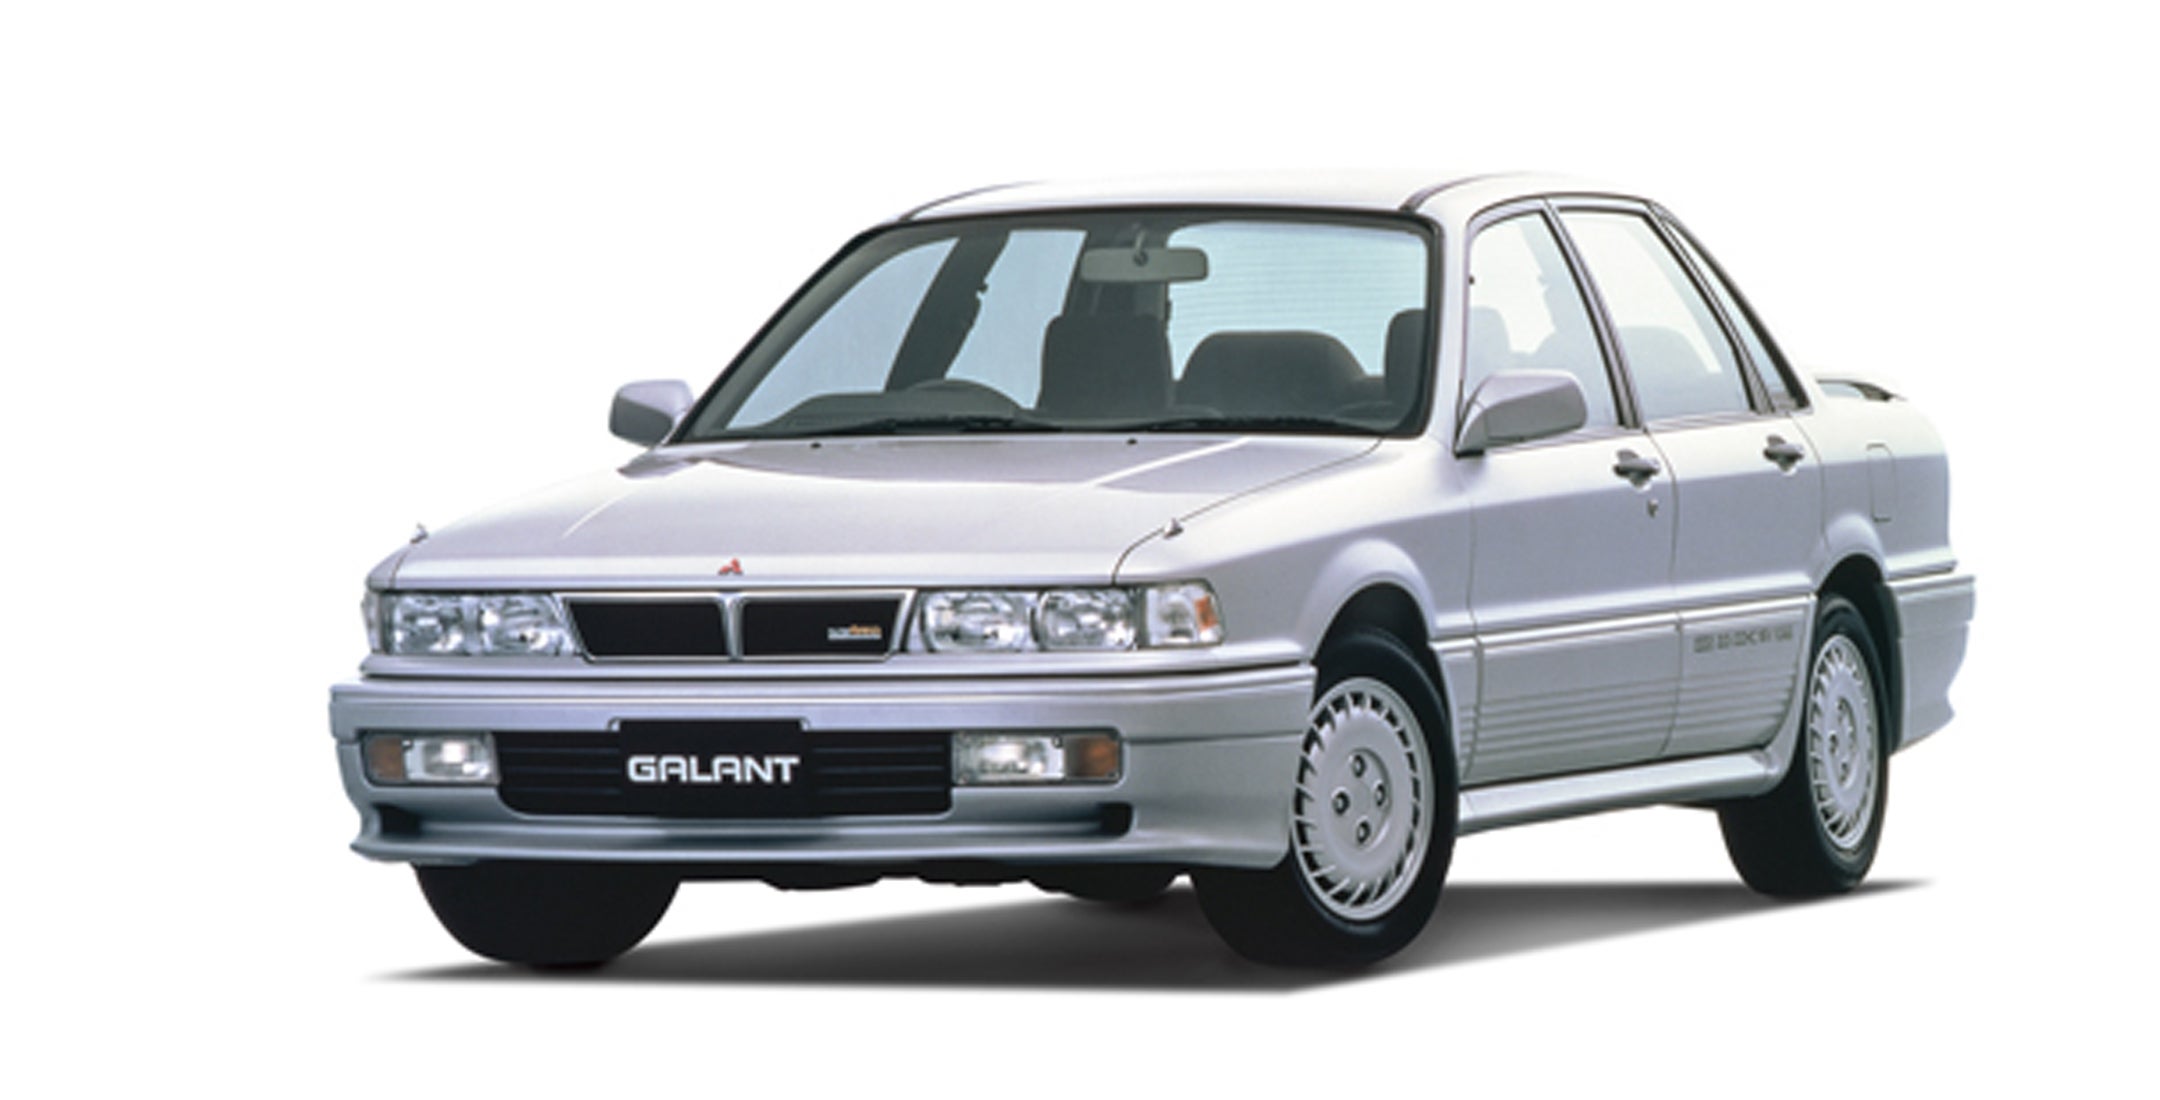 The Mitsubishi Galant The Only Japanese Car Tuned by AMG